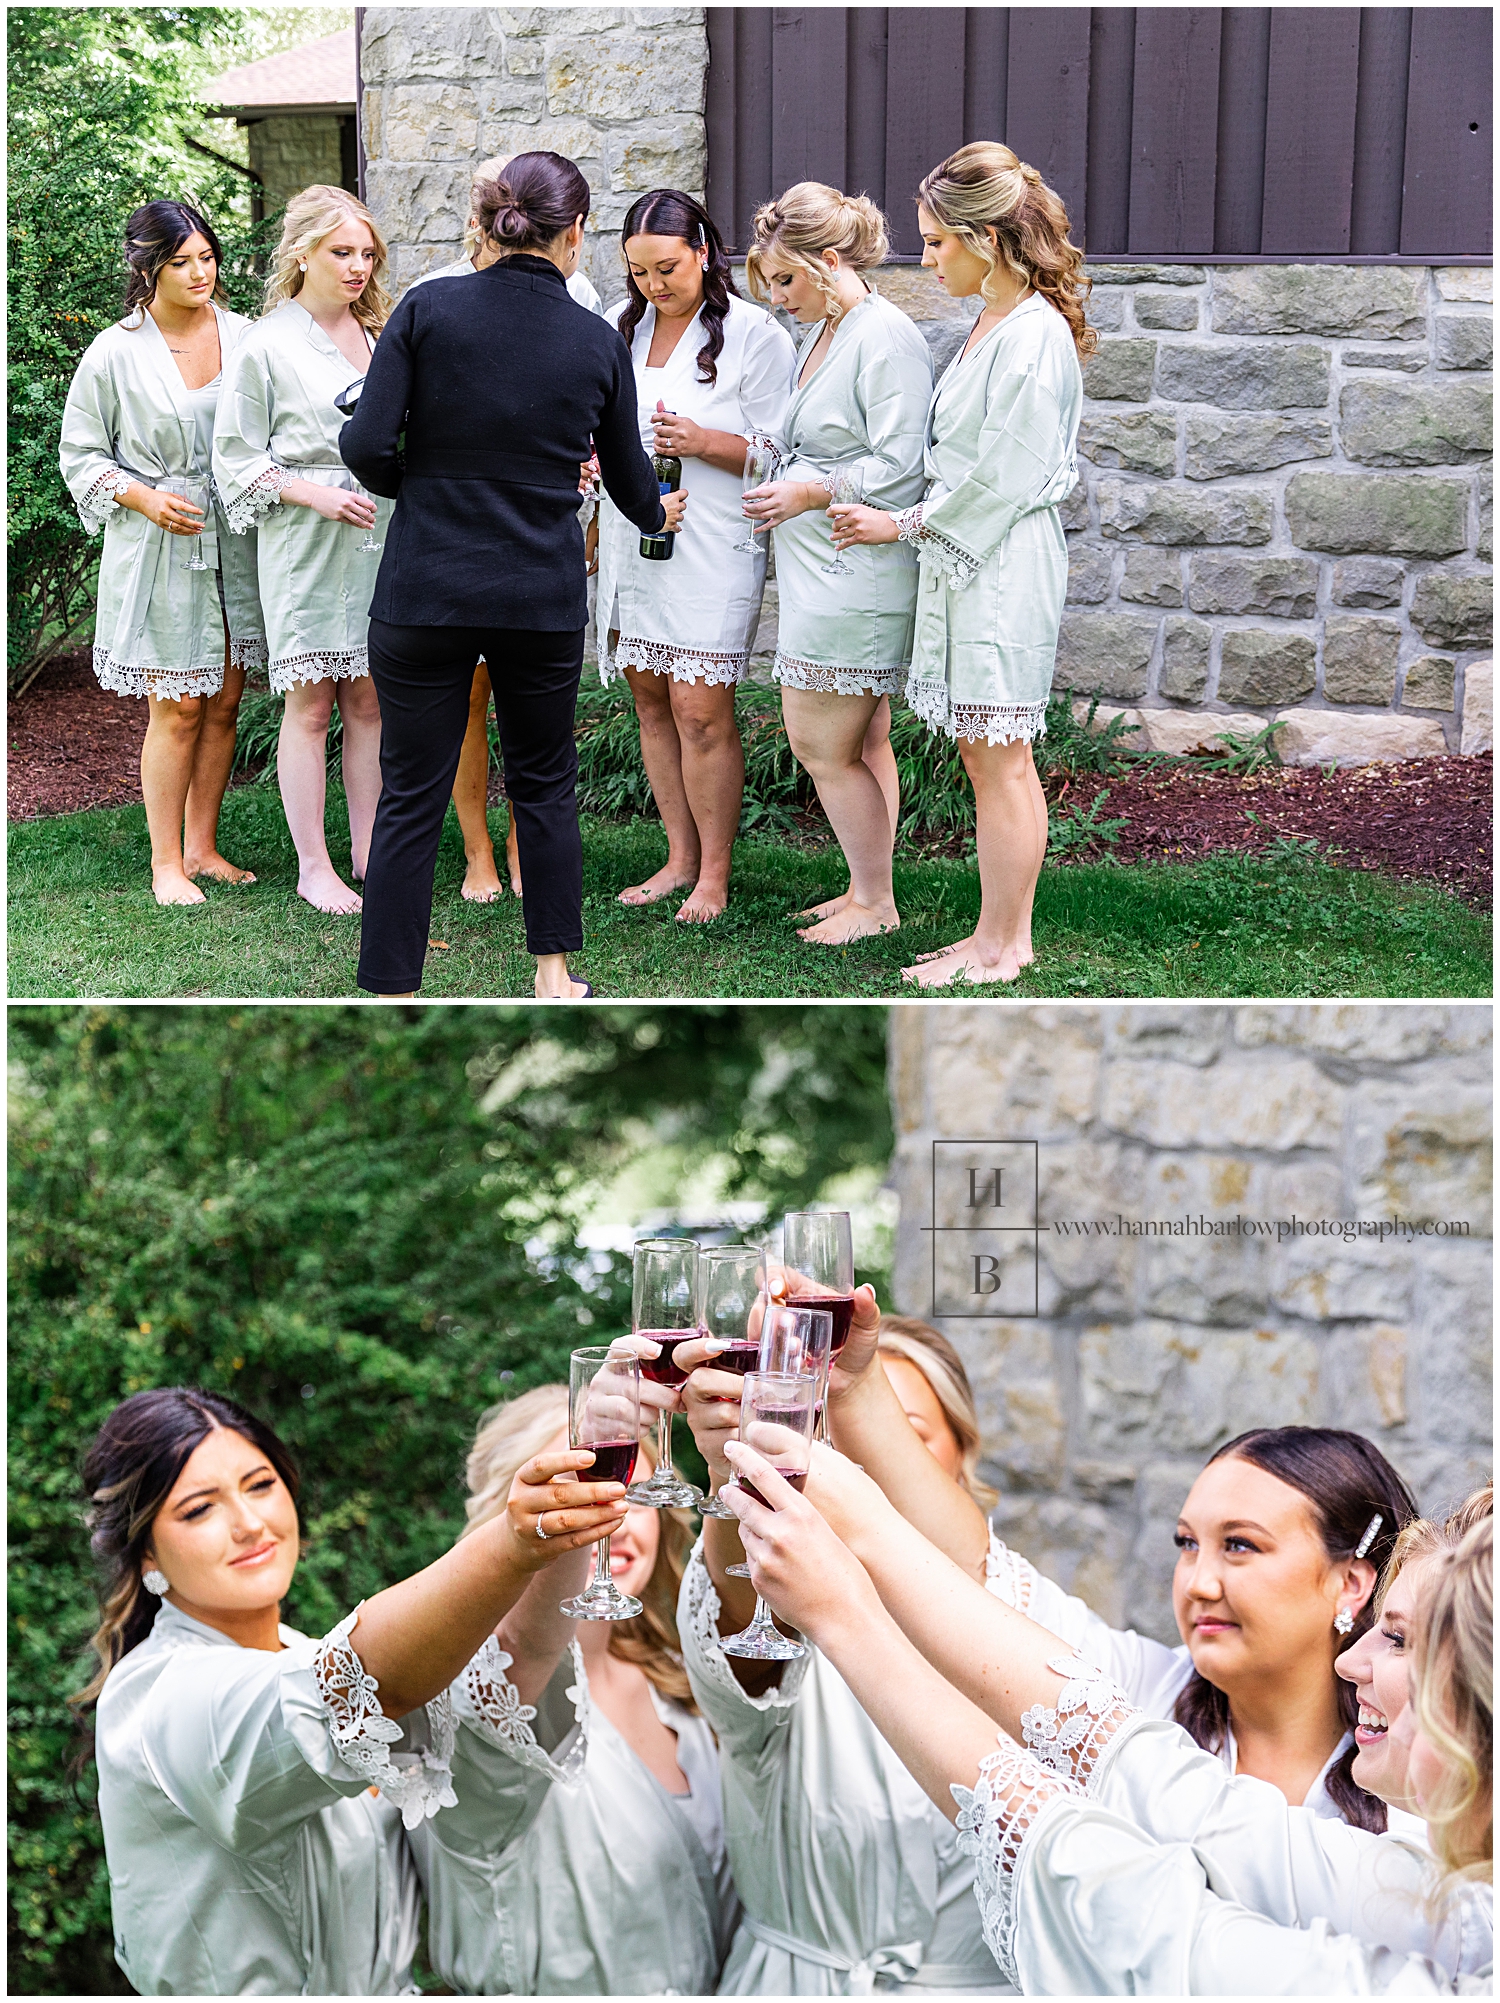 Wedding photographer positions ladies in bridal party for champagne photo